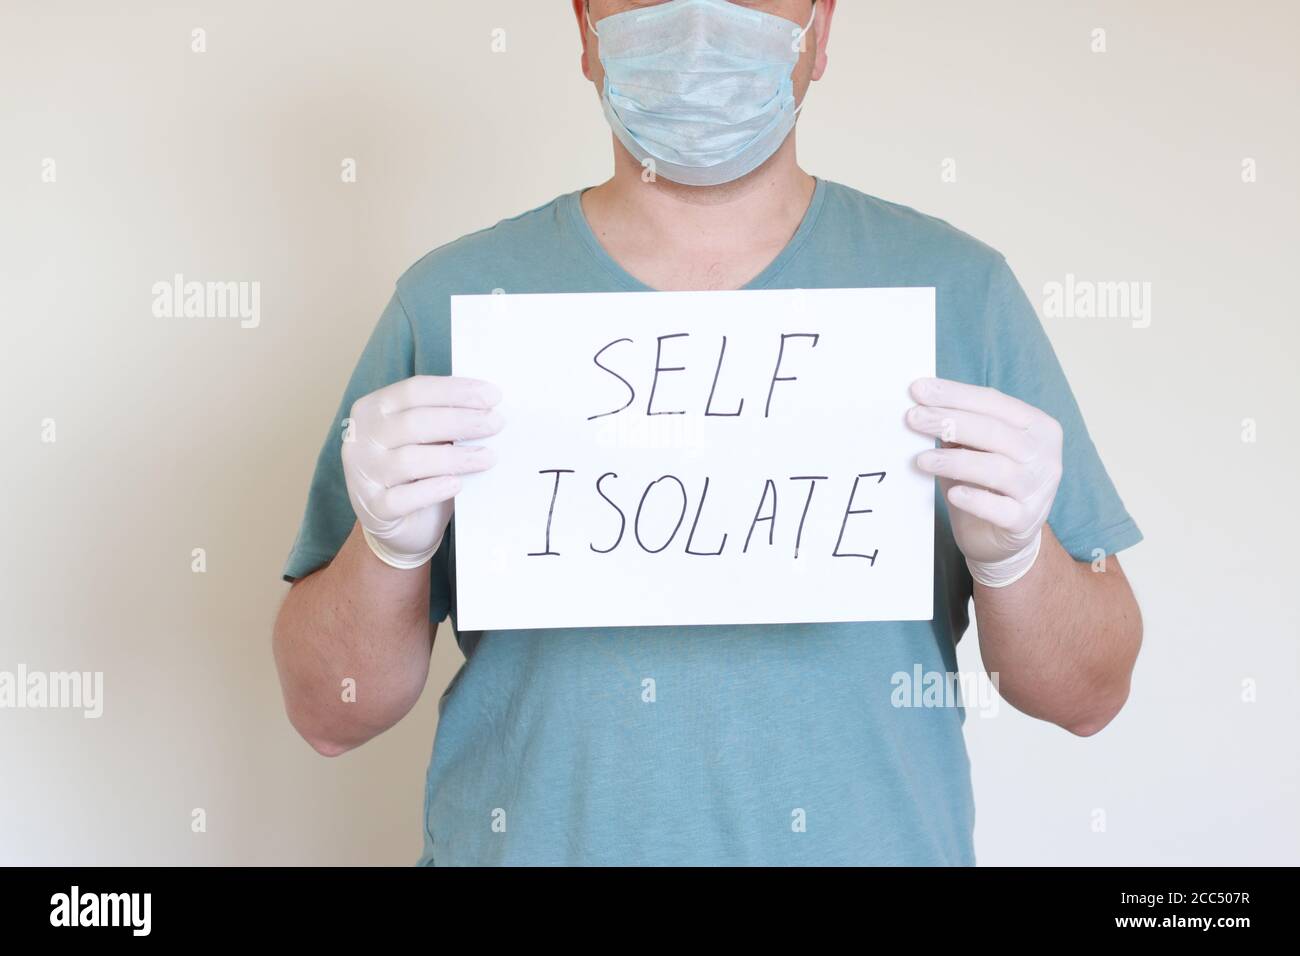 Doctor holding a Sign "Self Isolate". Stock Photo